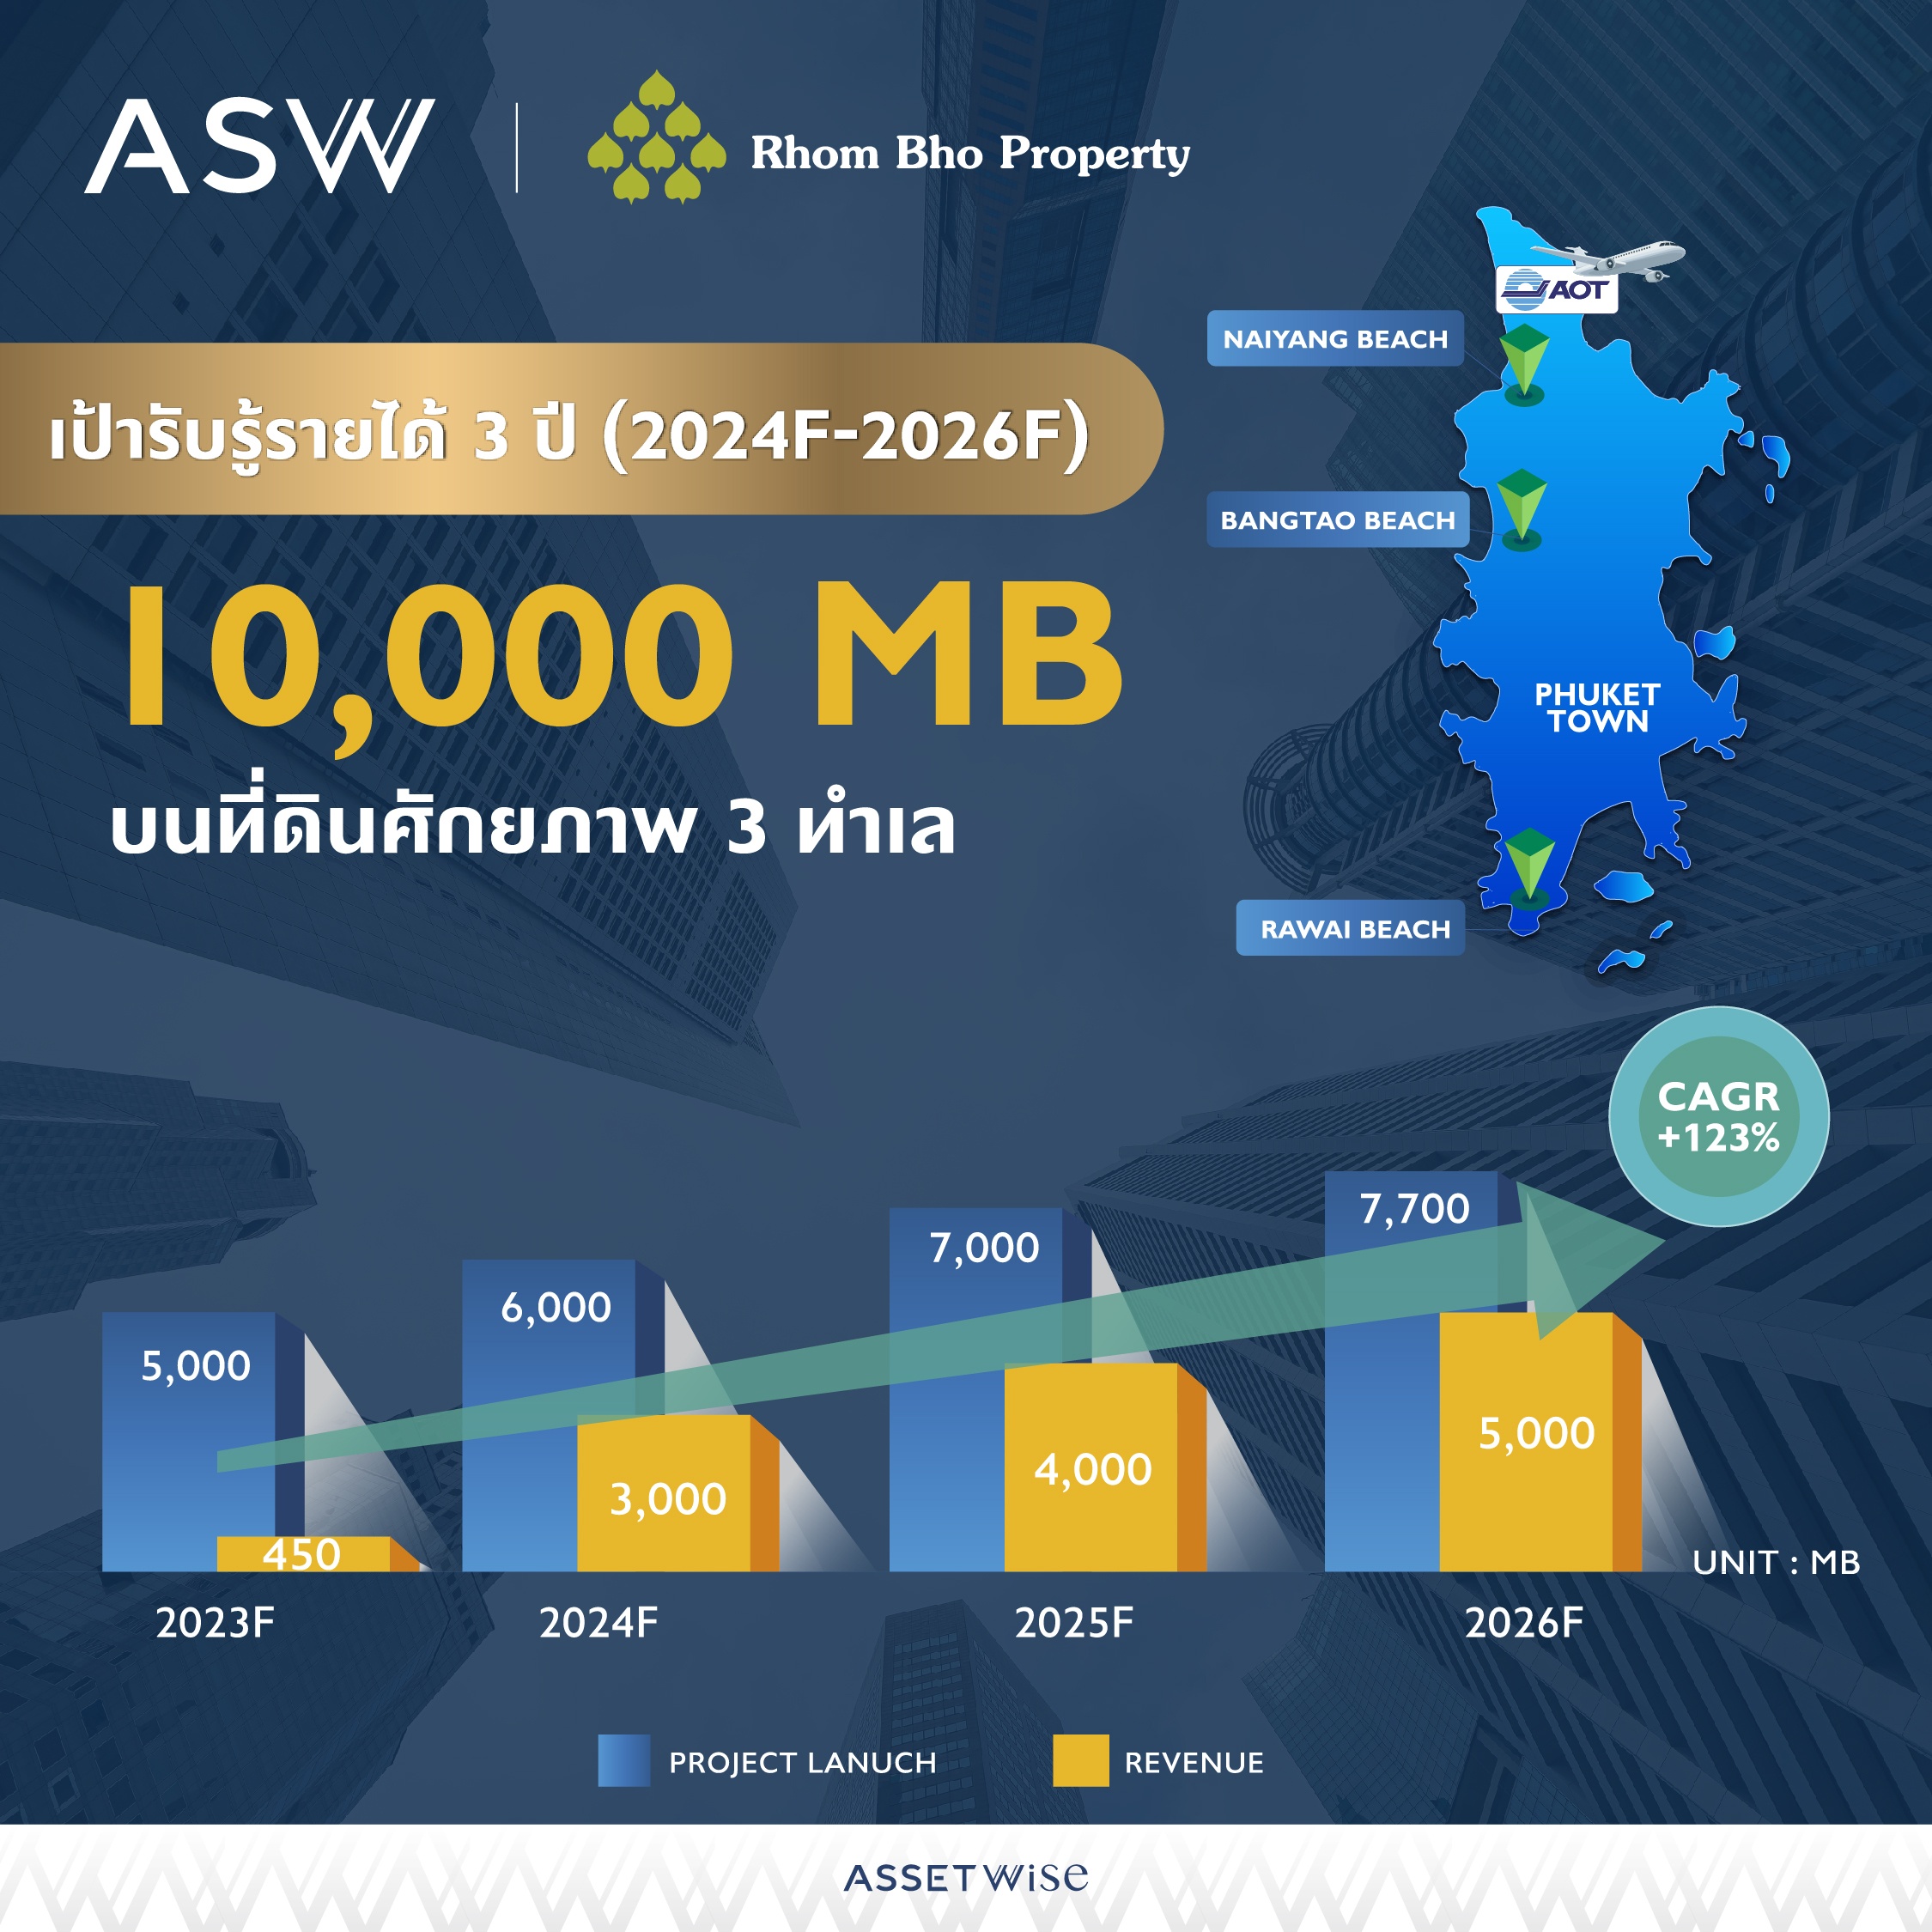 Infographic ASW_TITLE Co.jpg